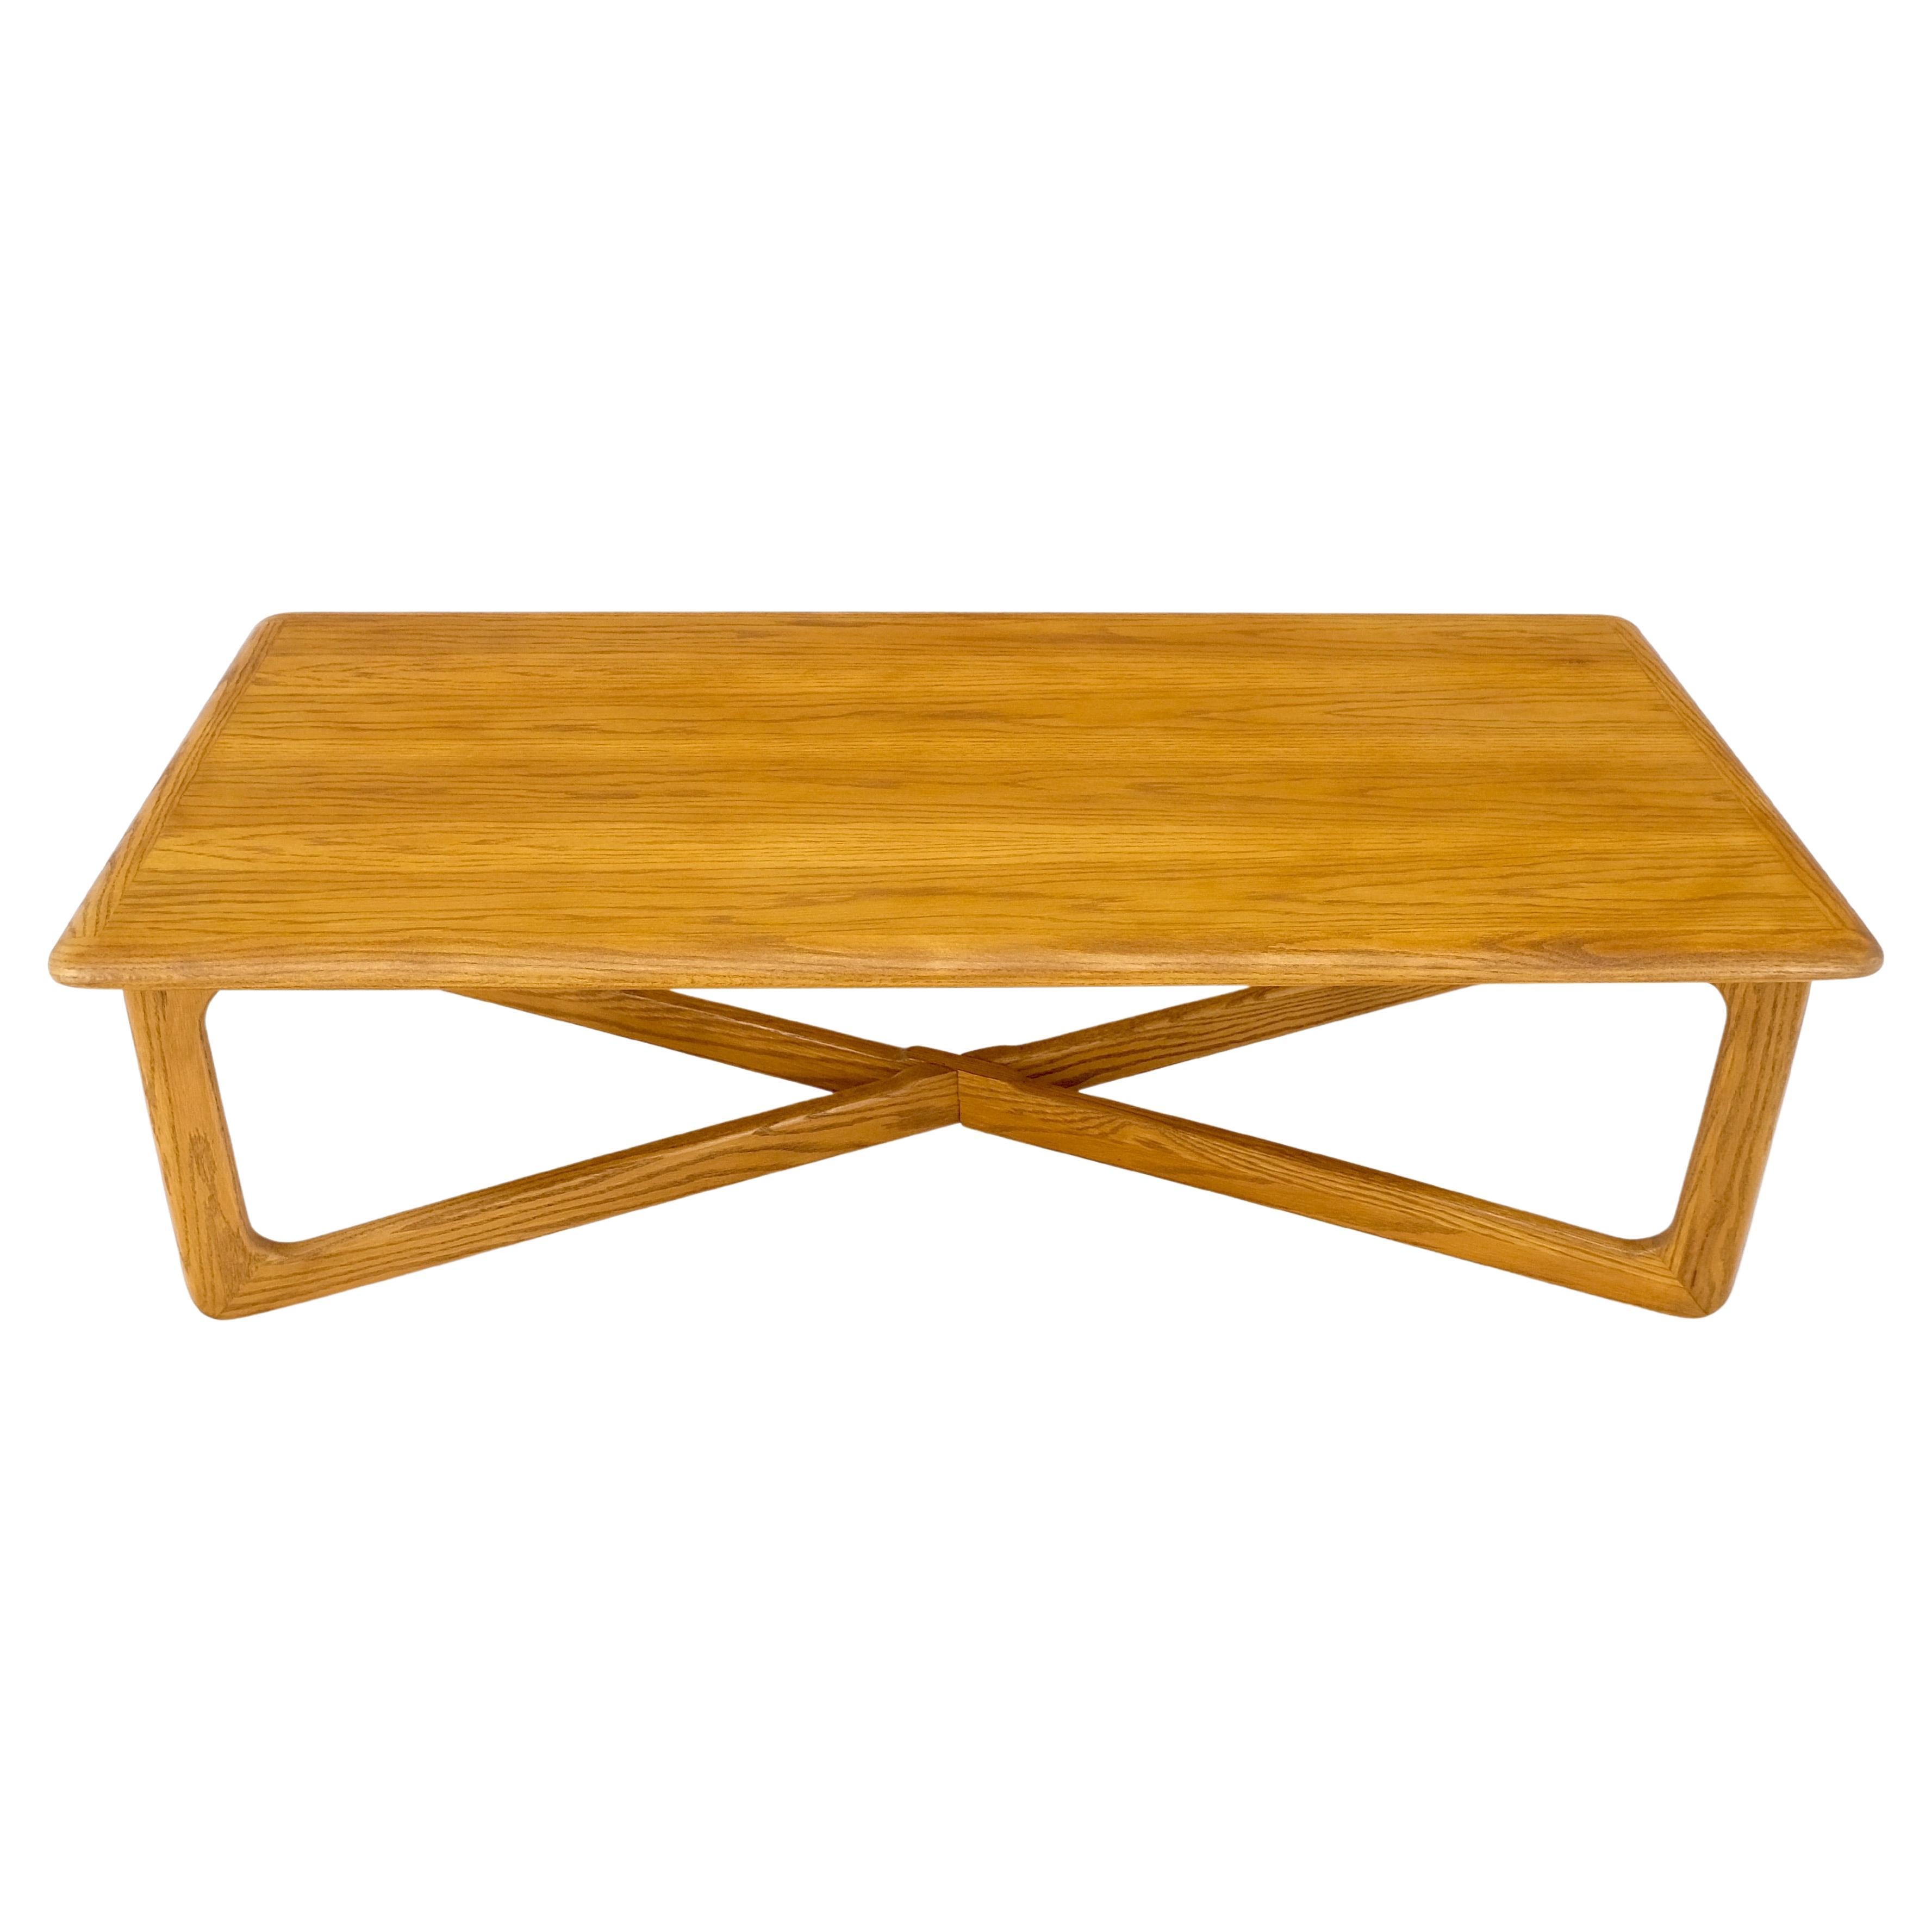 Restored x Base Rectangle Chestnut Coffee Table by Lane Mid-Century Modern Mint! For Sale